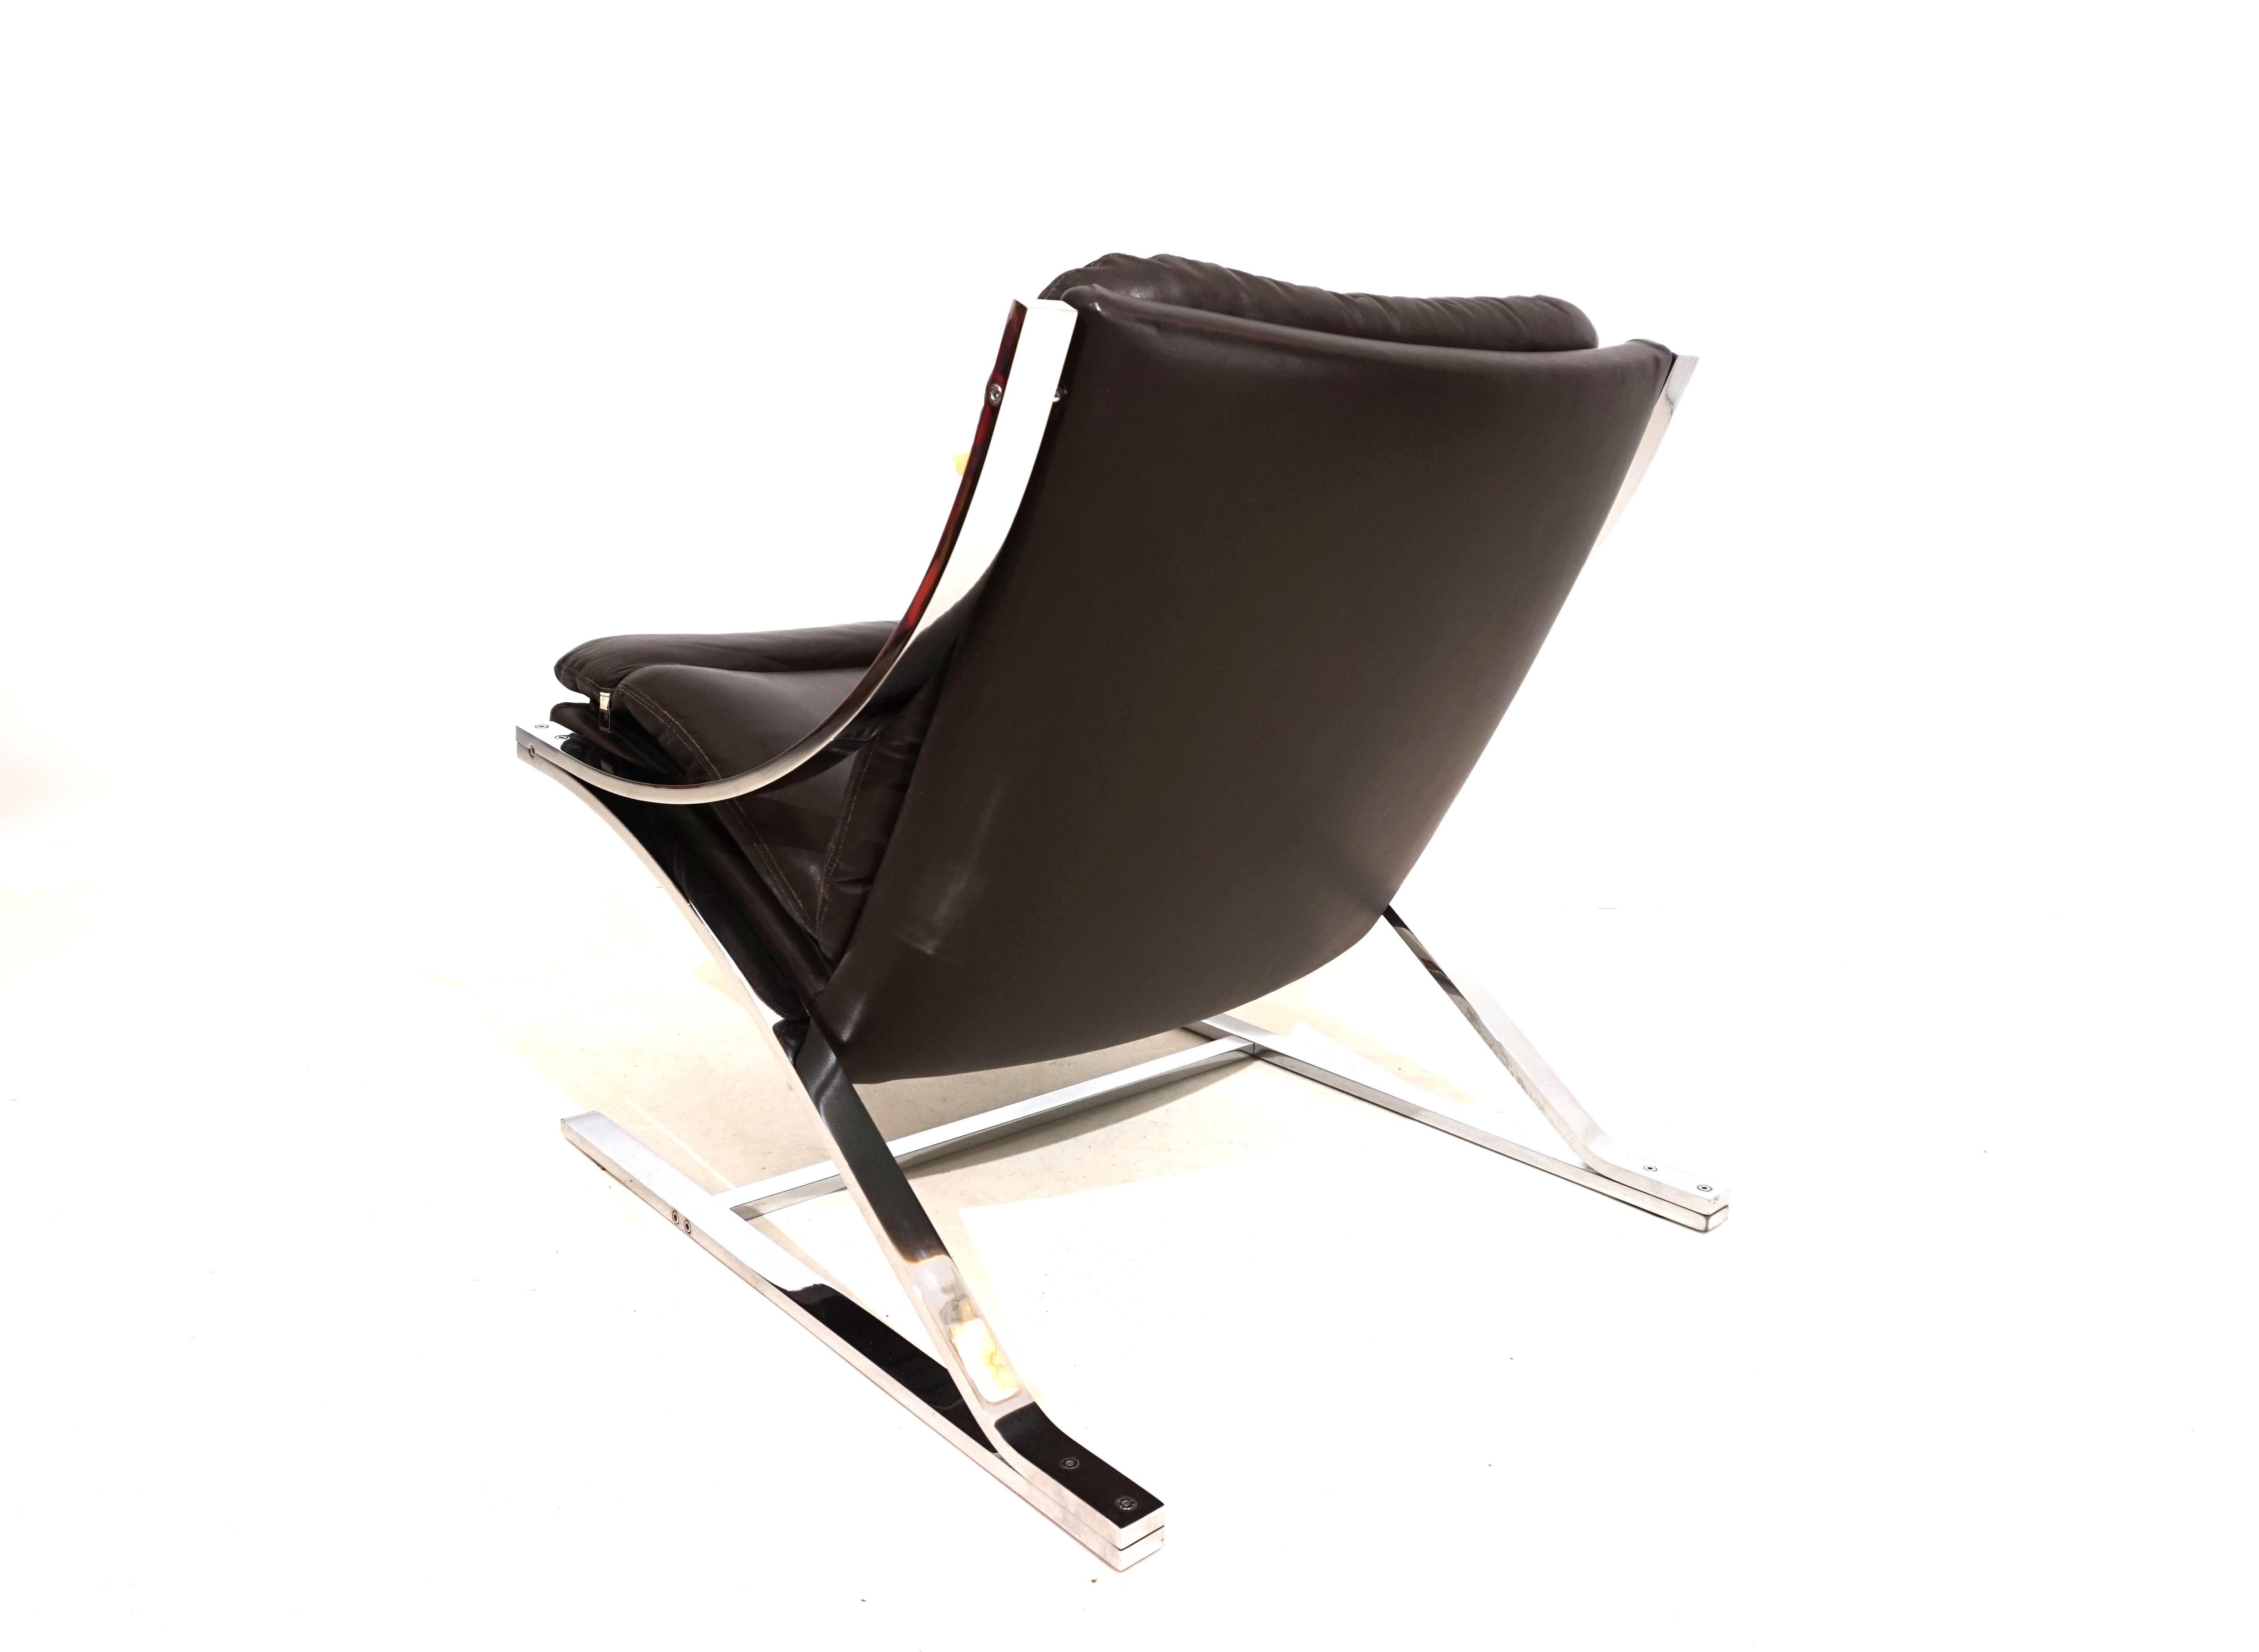 The Z armchair comes in dark brown aniline leather and is in excellent condition. The soft leather shows minimal signs of wear. The heavy stainless steel frame is shaped like a Z and gives the chair its name Z armchair. The metal frame is also